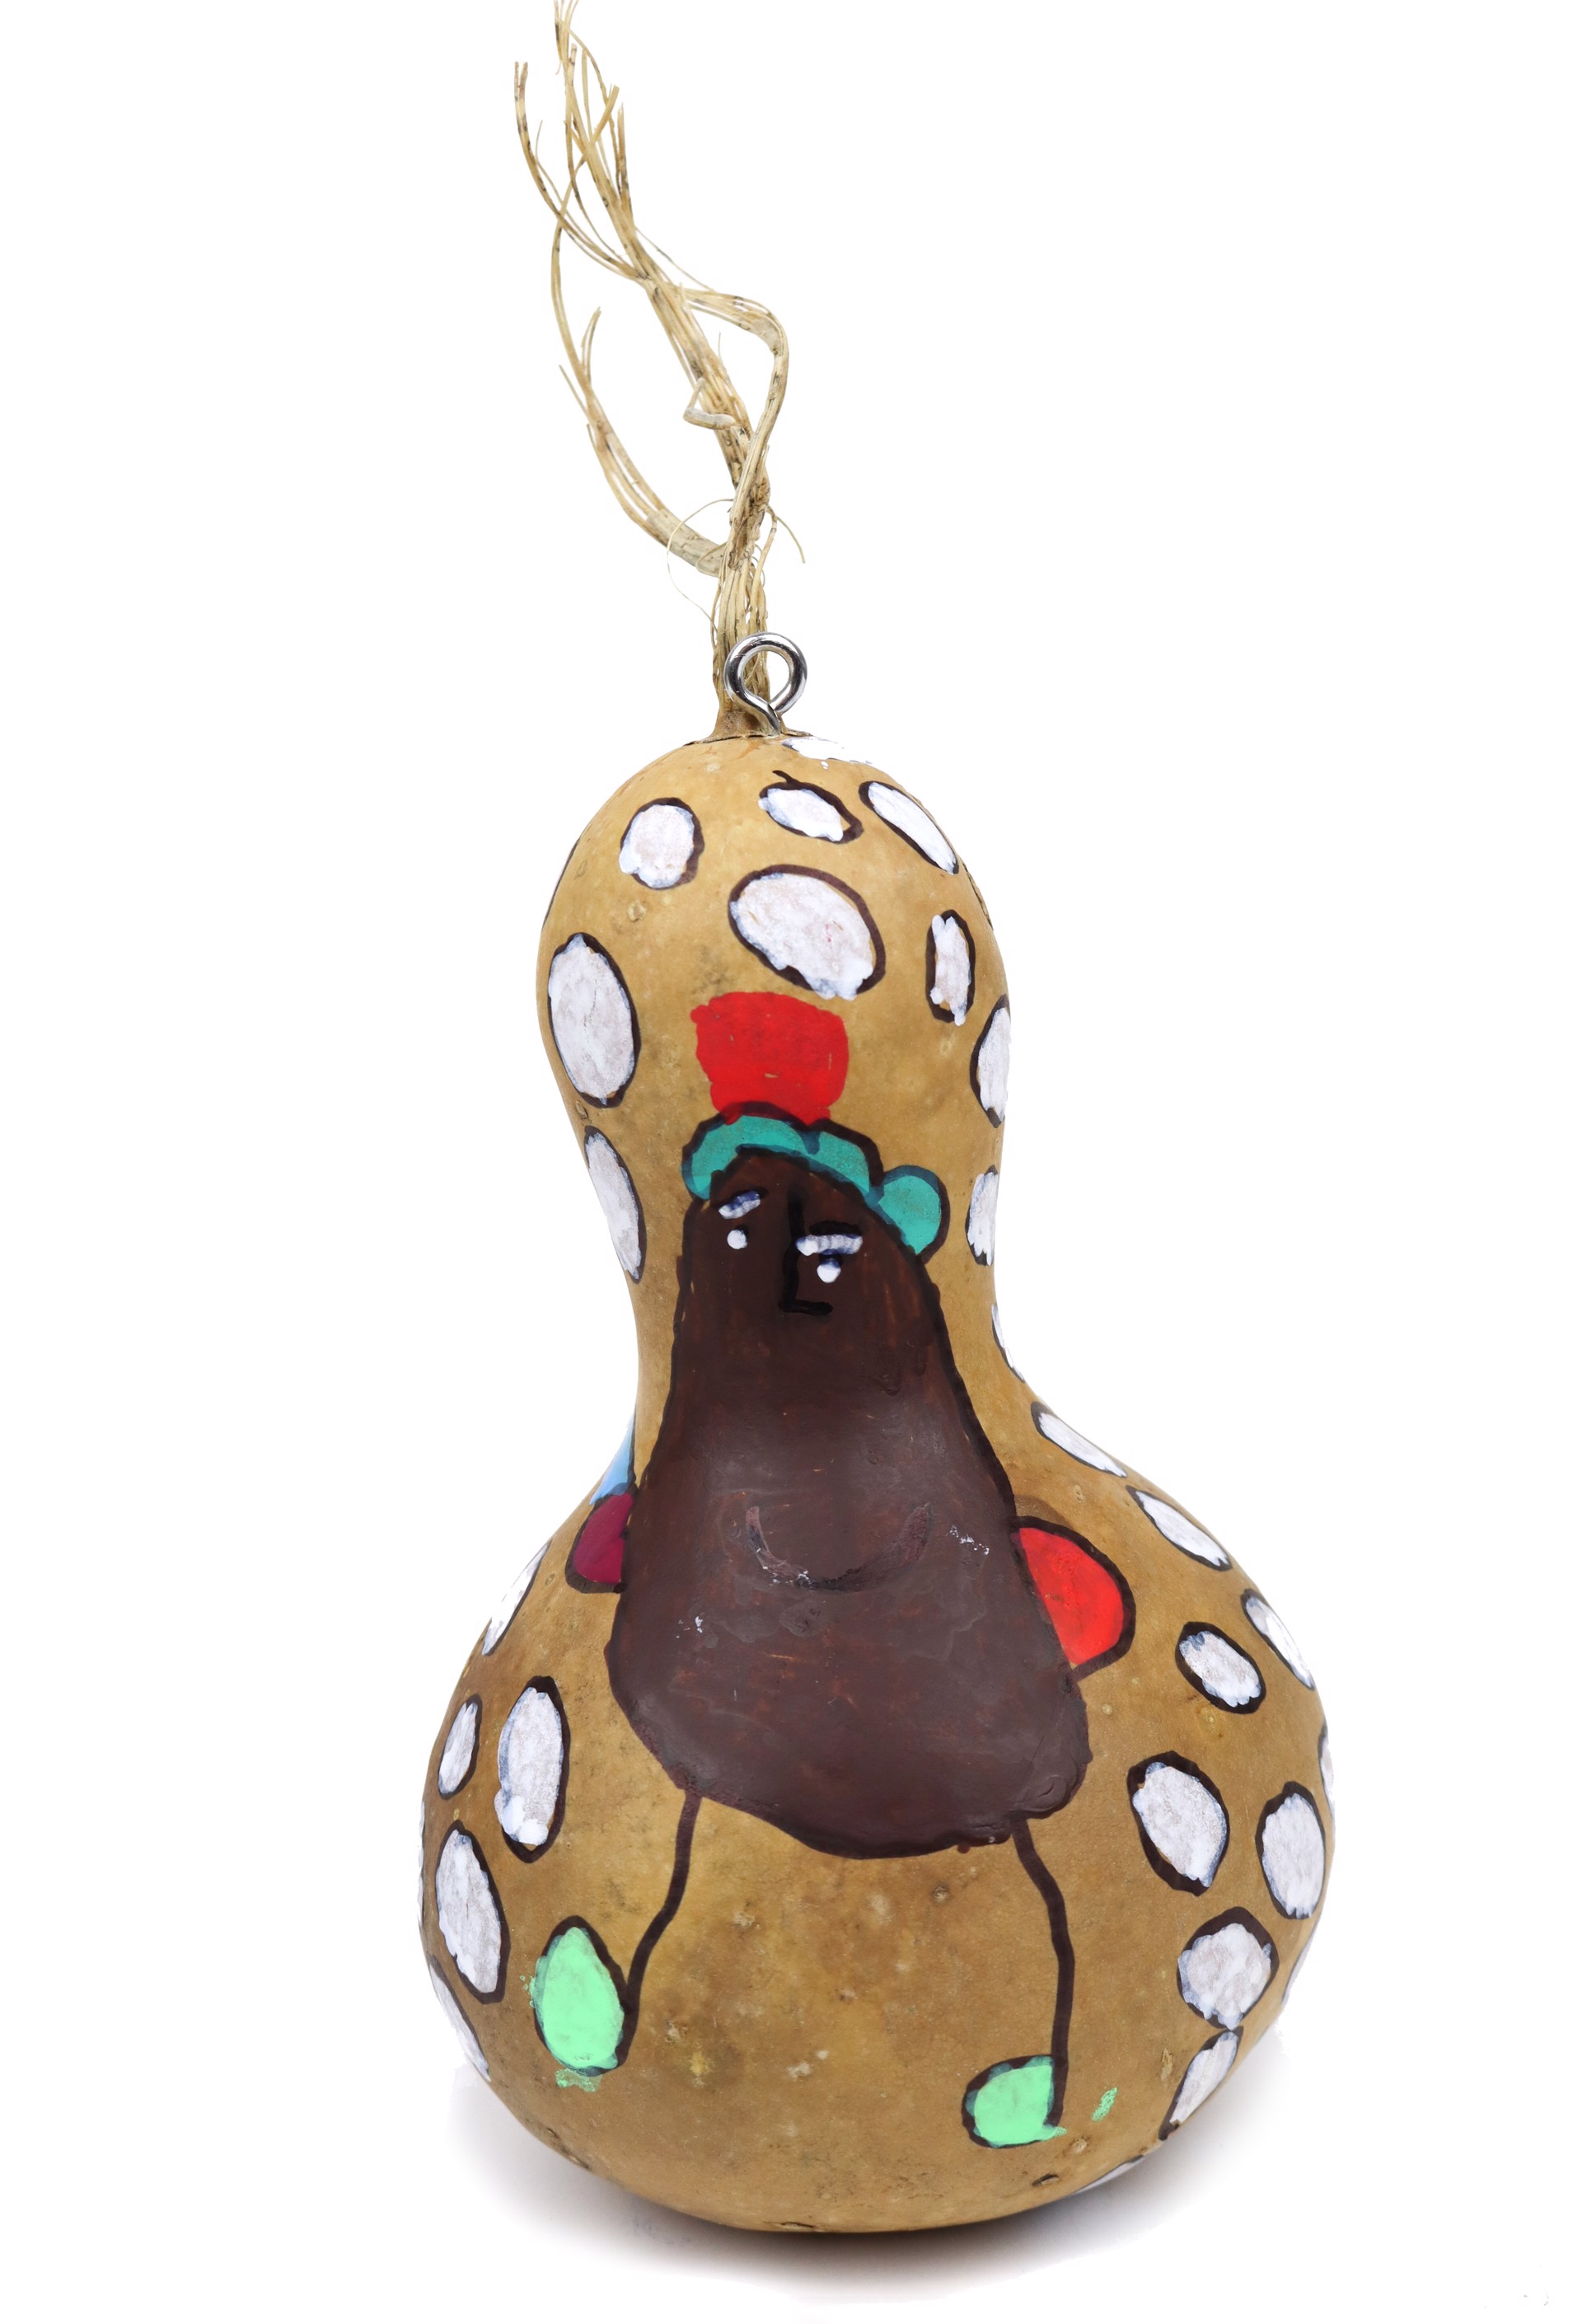 Dancing in the Snow (gourd ornament) by Eileen Schofield